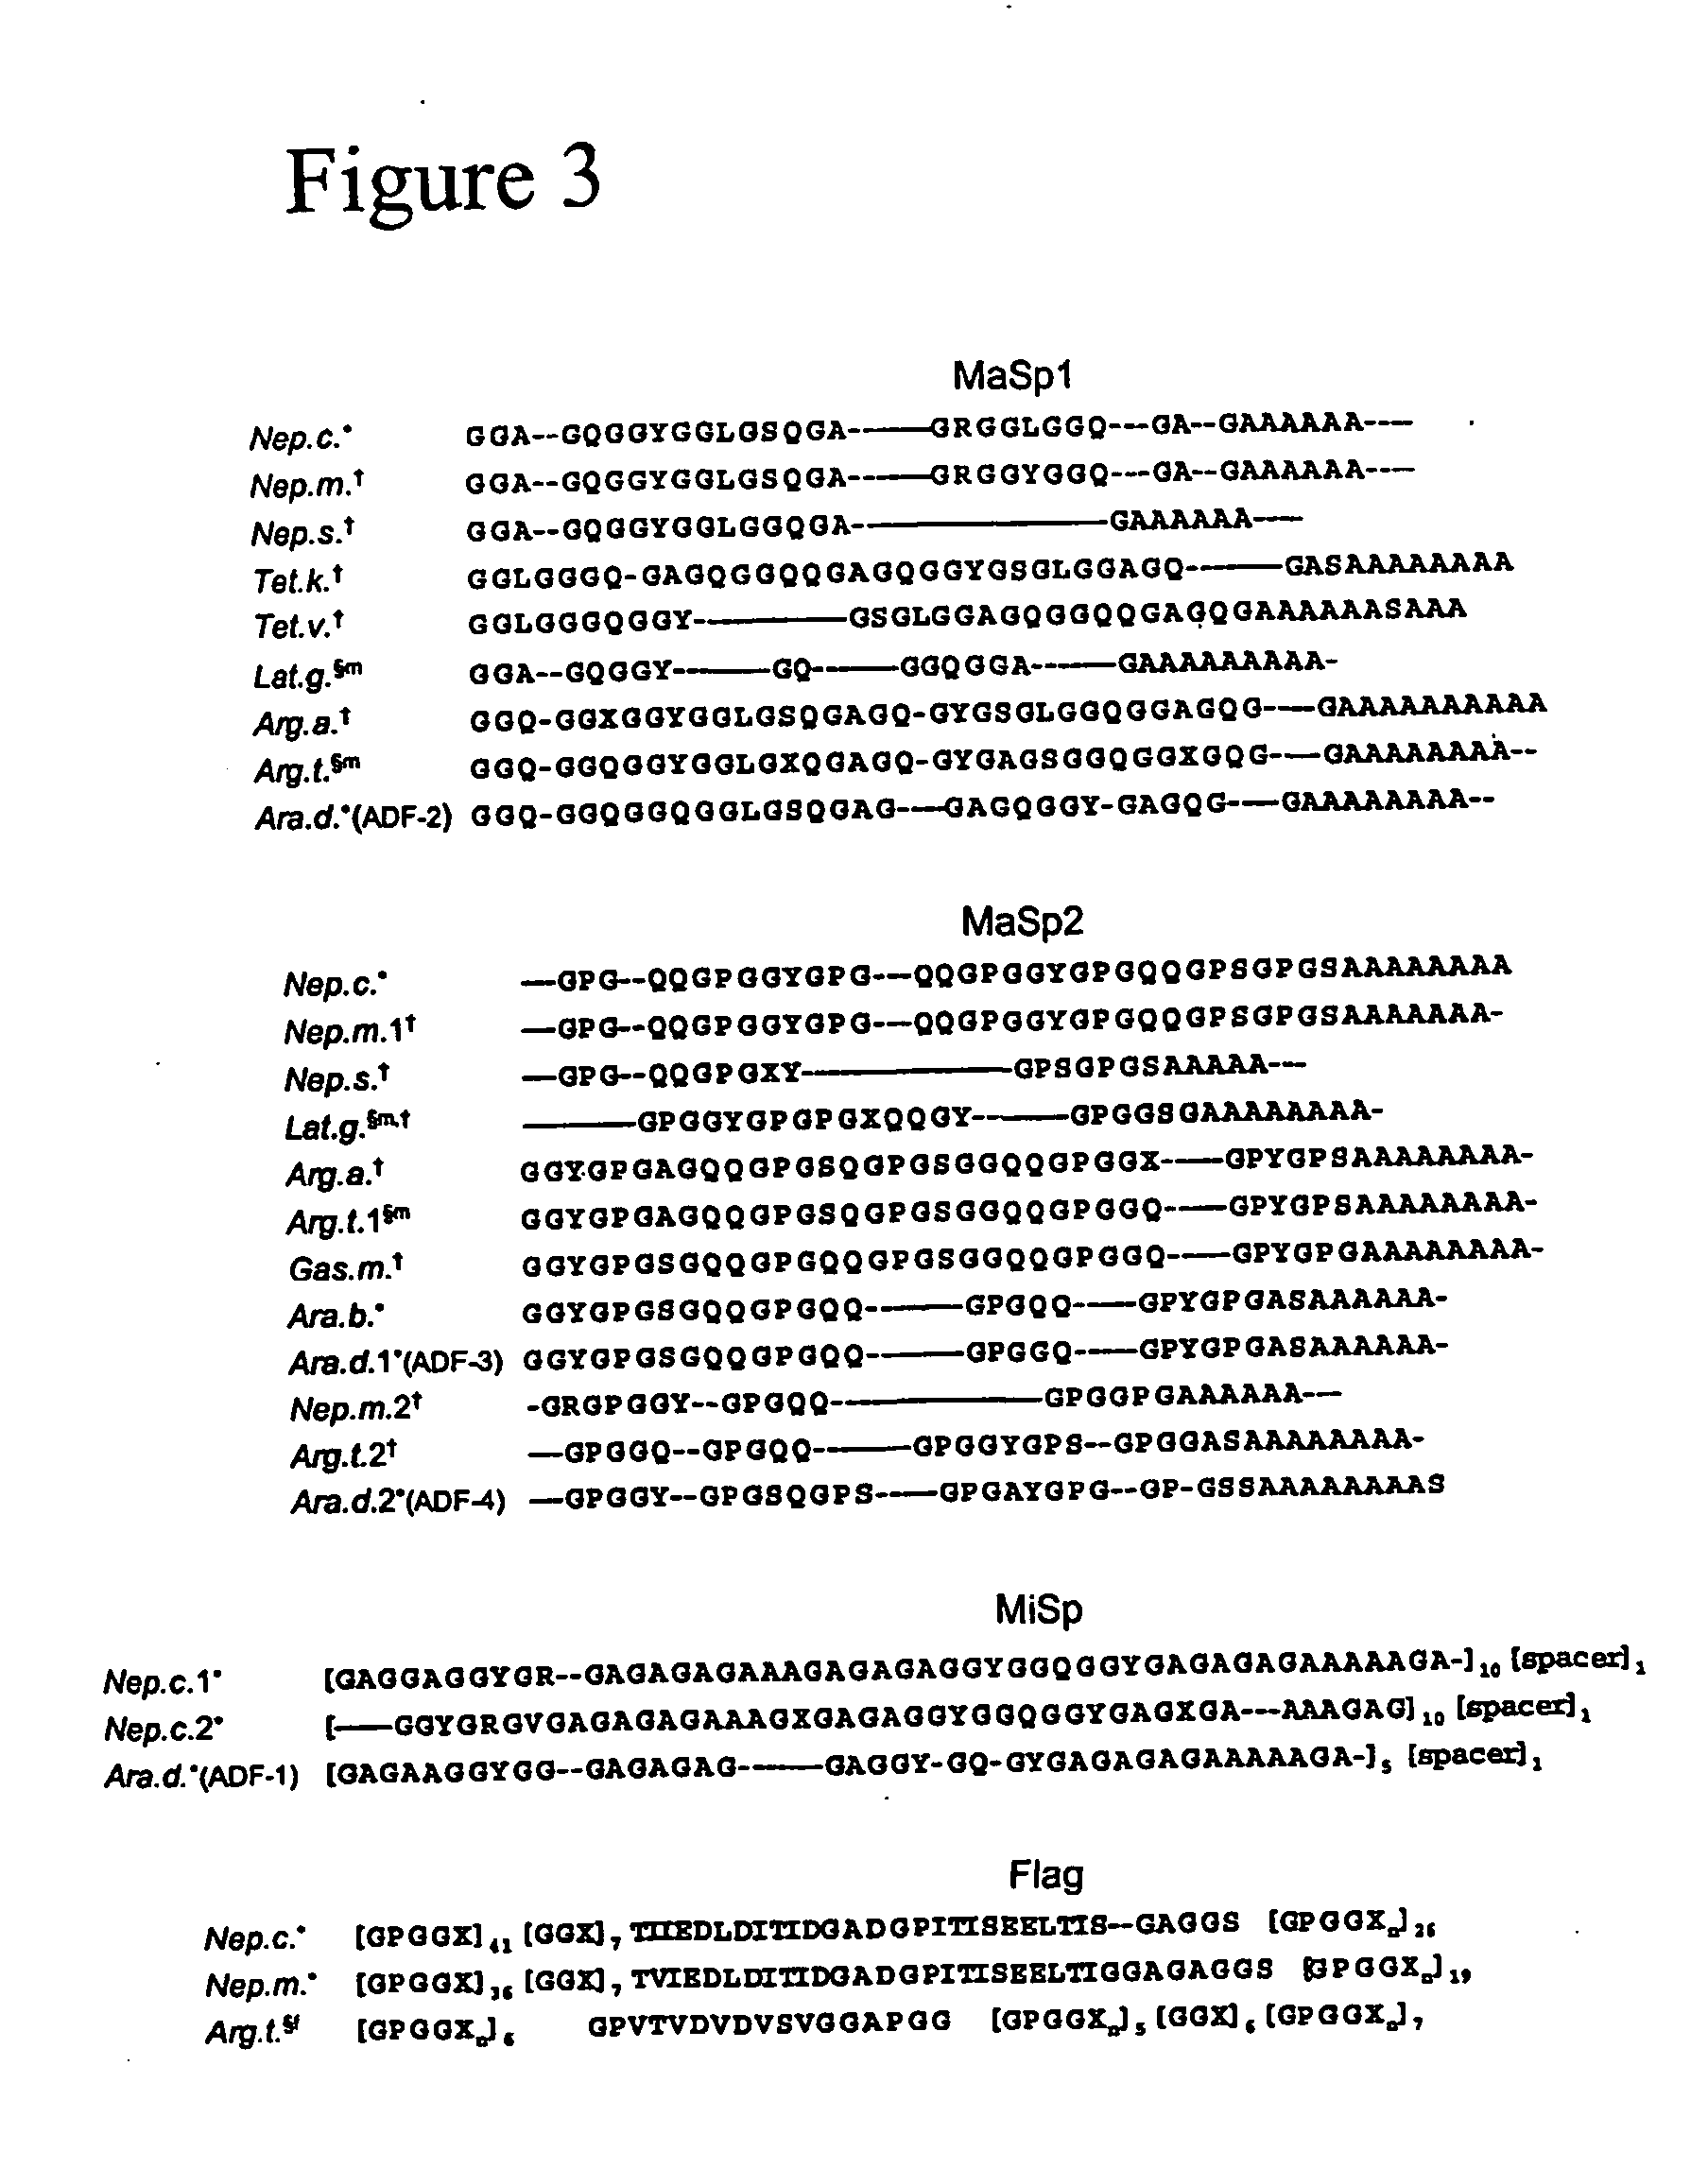 Spider silk protein encoding nucleic acids, polypeptides, antibodies and methods of use thereof